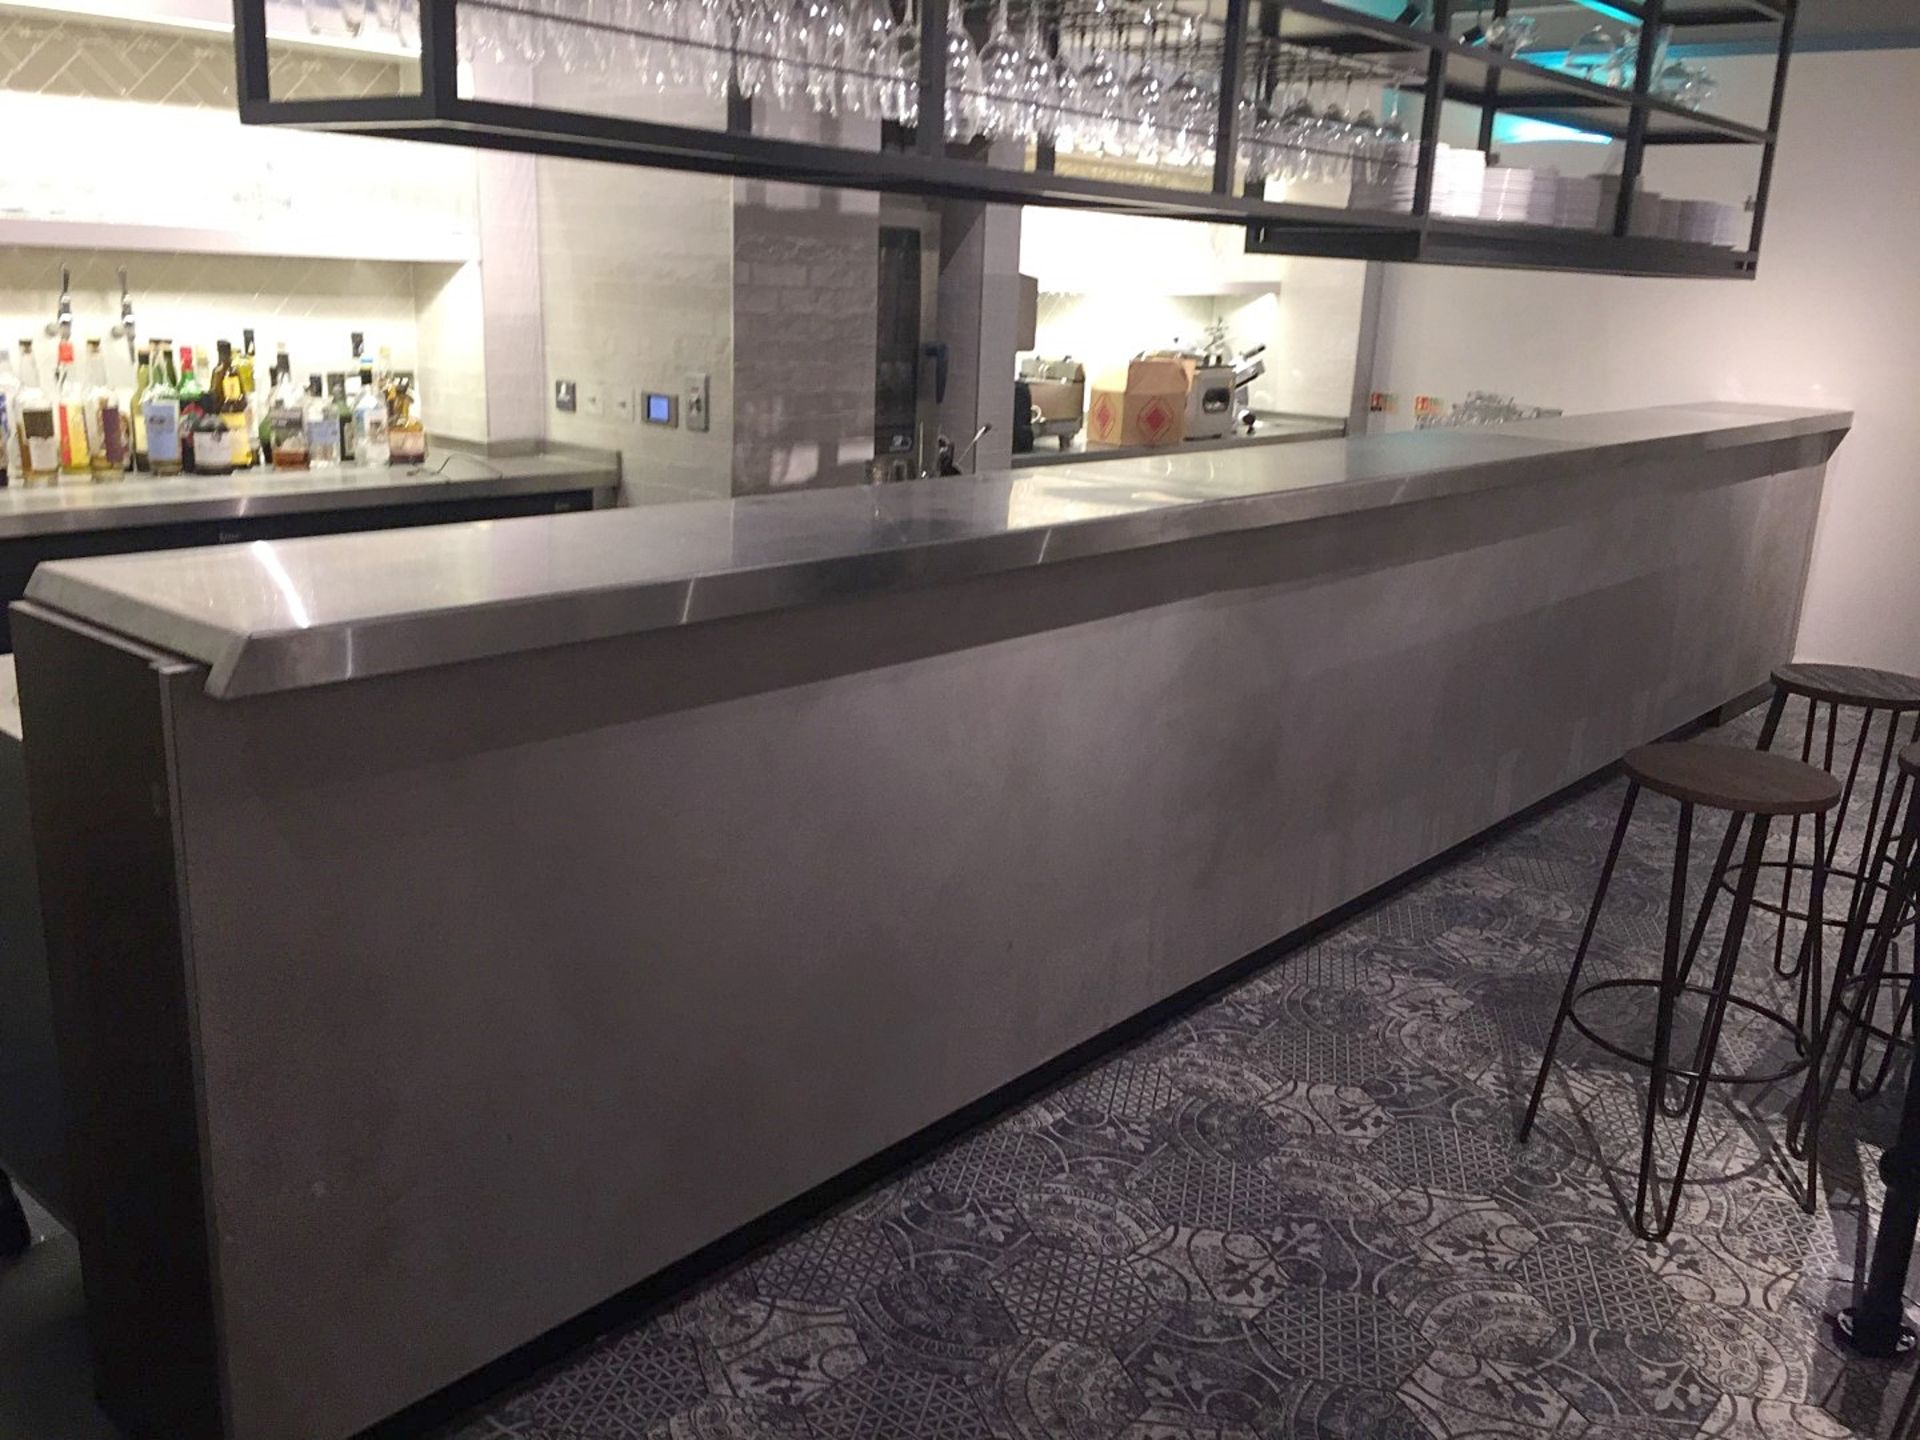 1 x Restaurant Serving Counter Featuring Stainless Steel Top And Hatches At Both Ends - Originally I